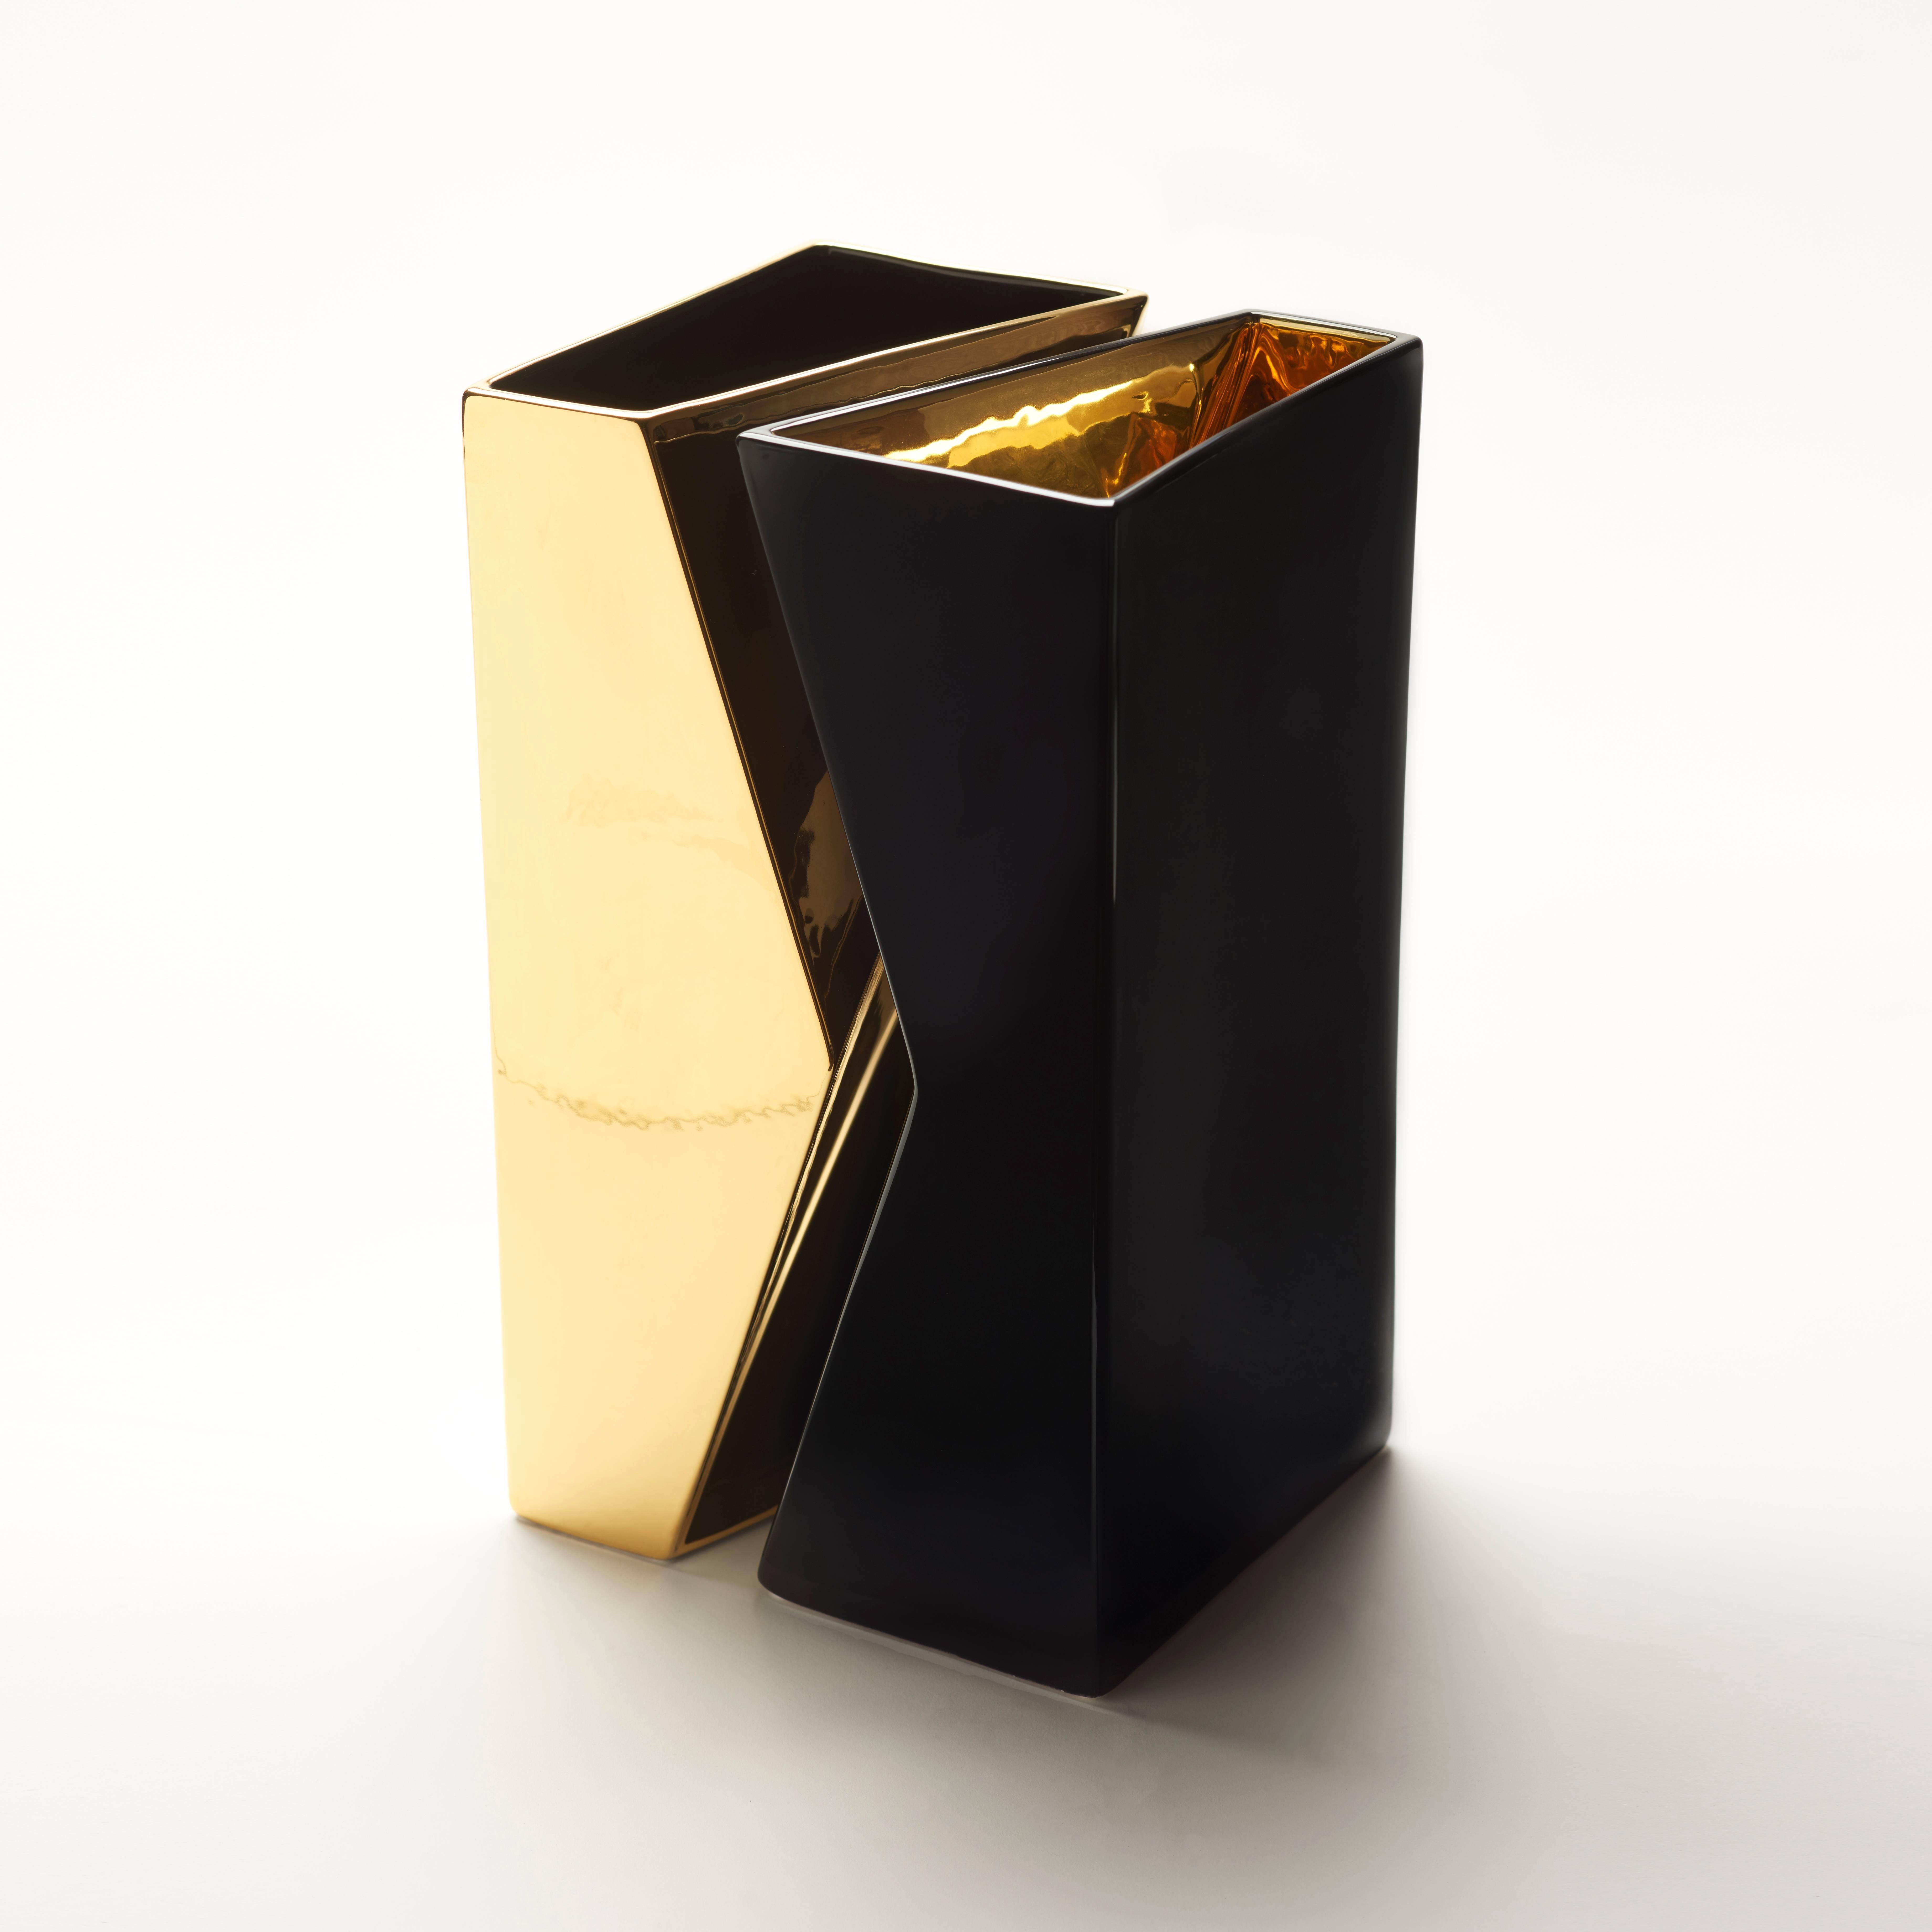 Pair of vases black with gold inside and gold with black inside, in ceramic, essential geometry, pure and unique forms, represent the direction. The separation or the union is defined by color. Separated or united, as well as they can contain